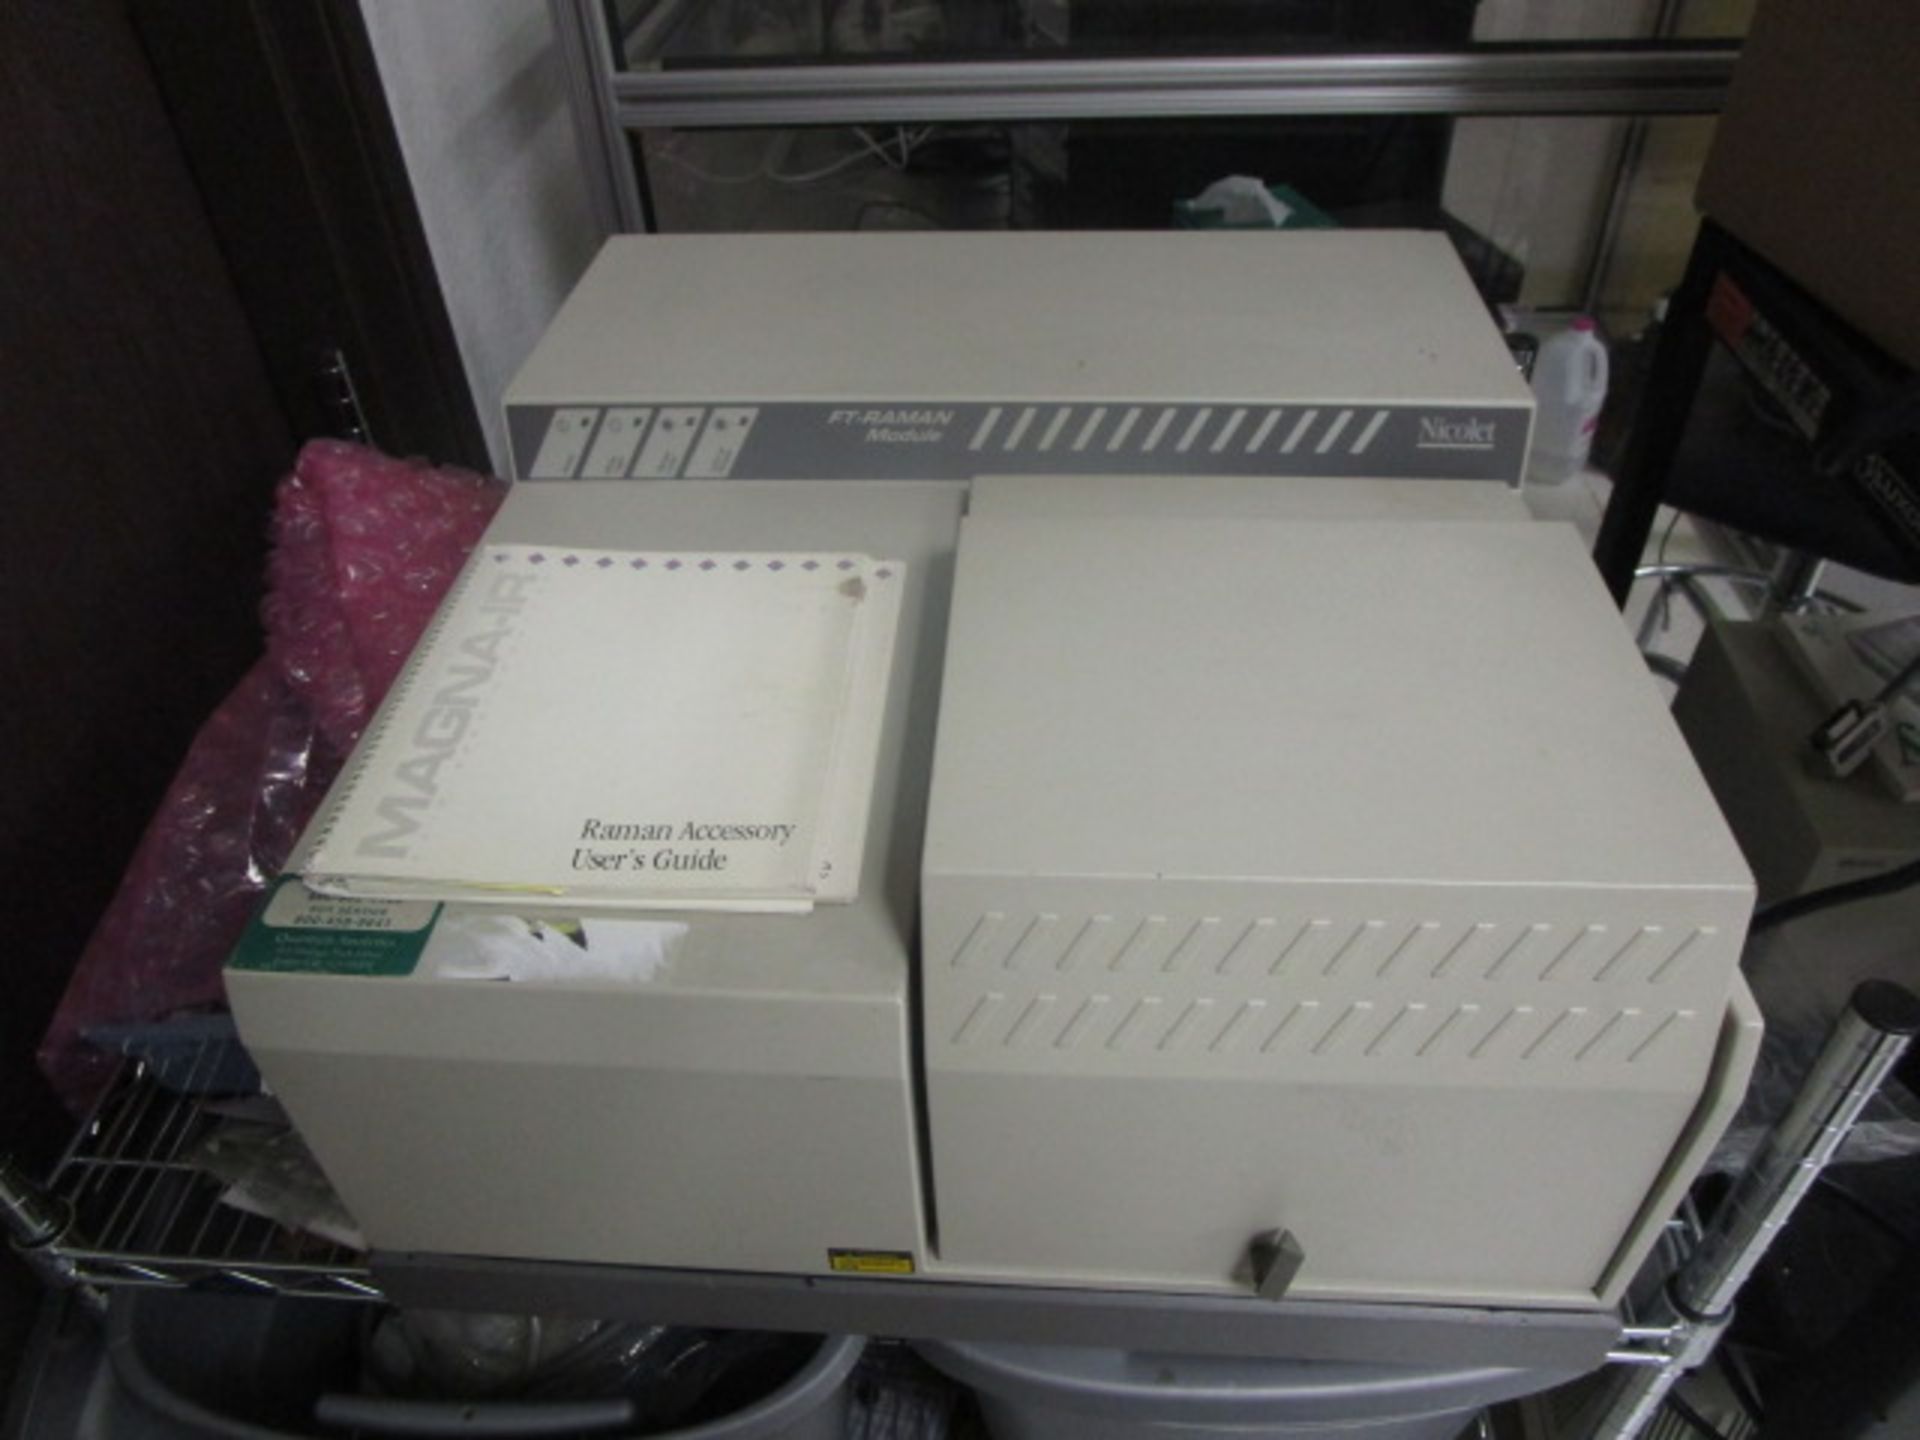 Nicolet Magna- IR 560 Spectromer E.S.P. to include software tutorial, and "32 bit" SW. Near and - Image 23 of 31